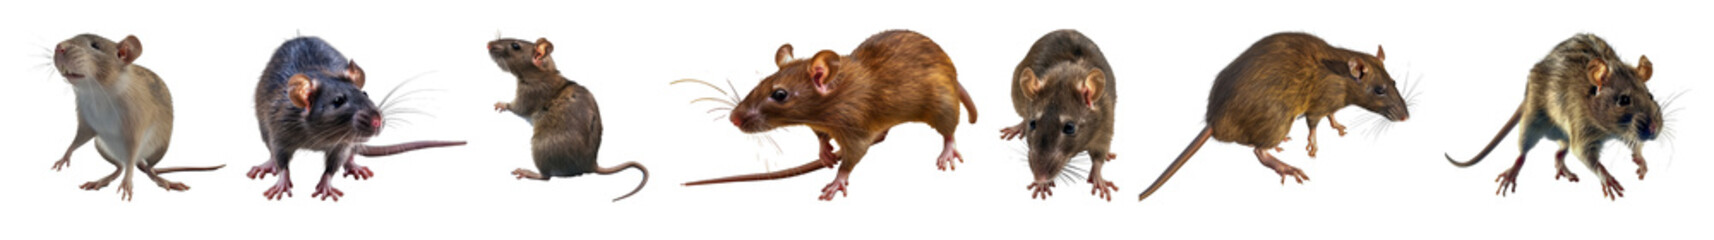 Detailed images of various poses of brown and gray rats cut out png on transparent background